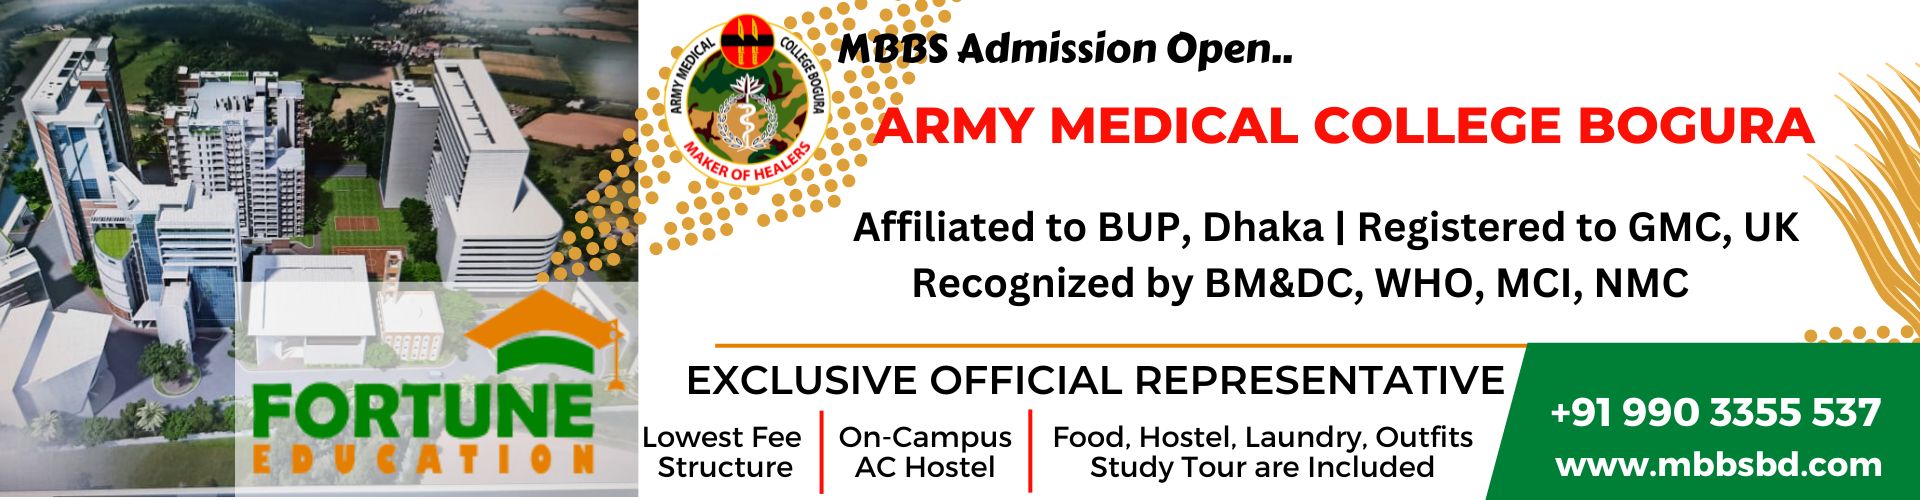 BMC-Bangladesh Medical Colleges for Admission